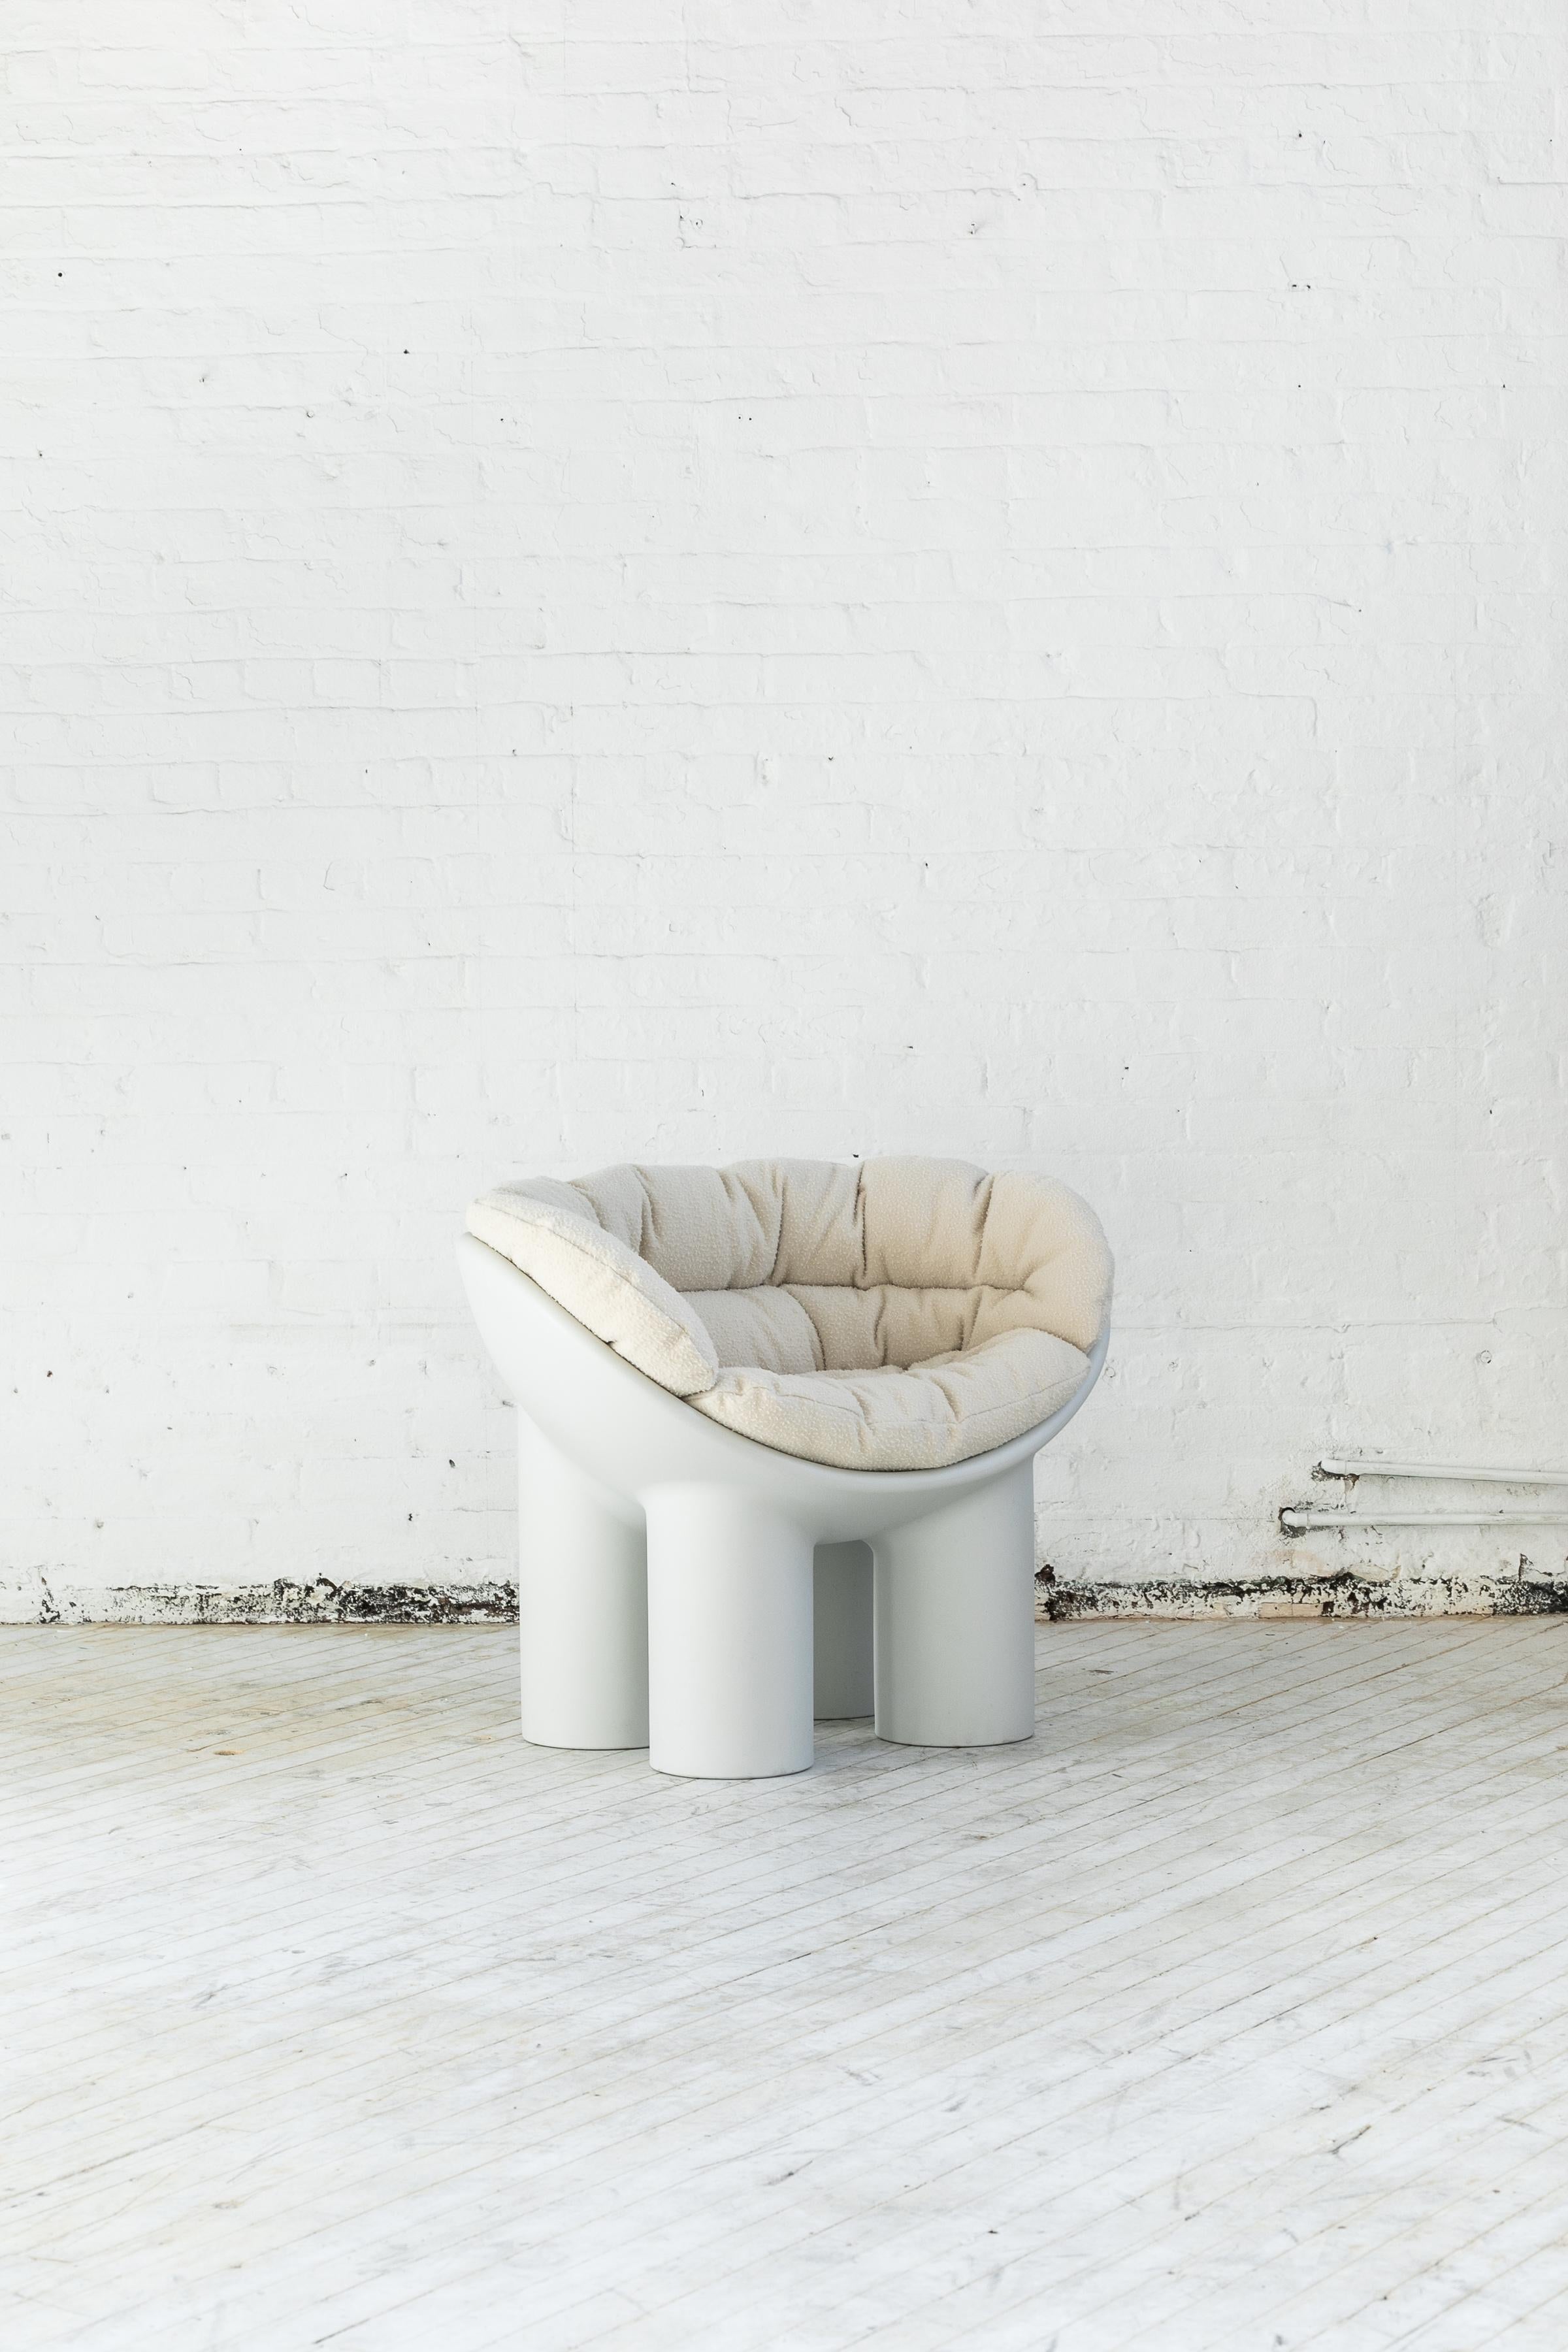 faye toogood roly poly chair